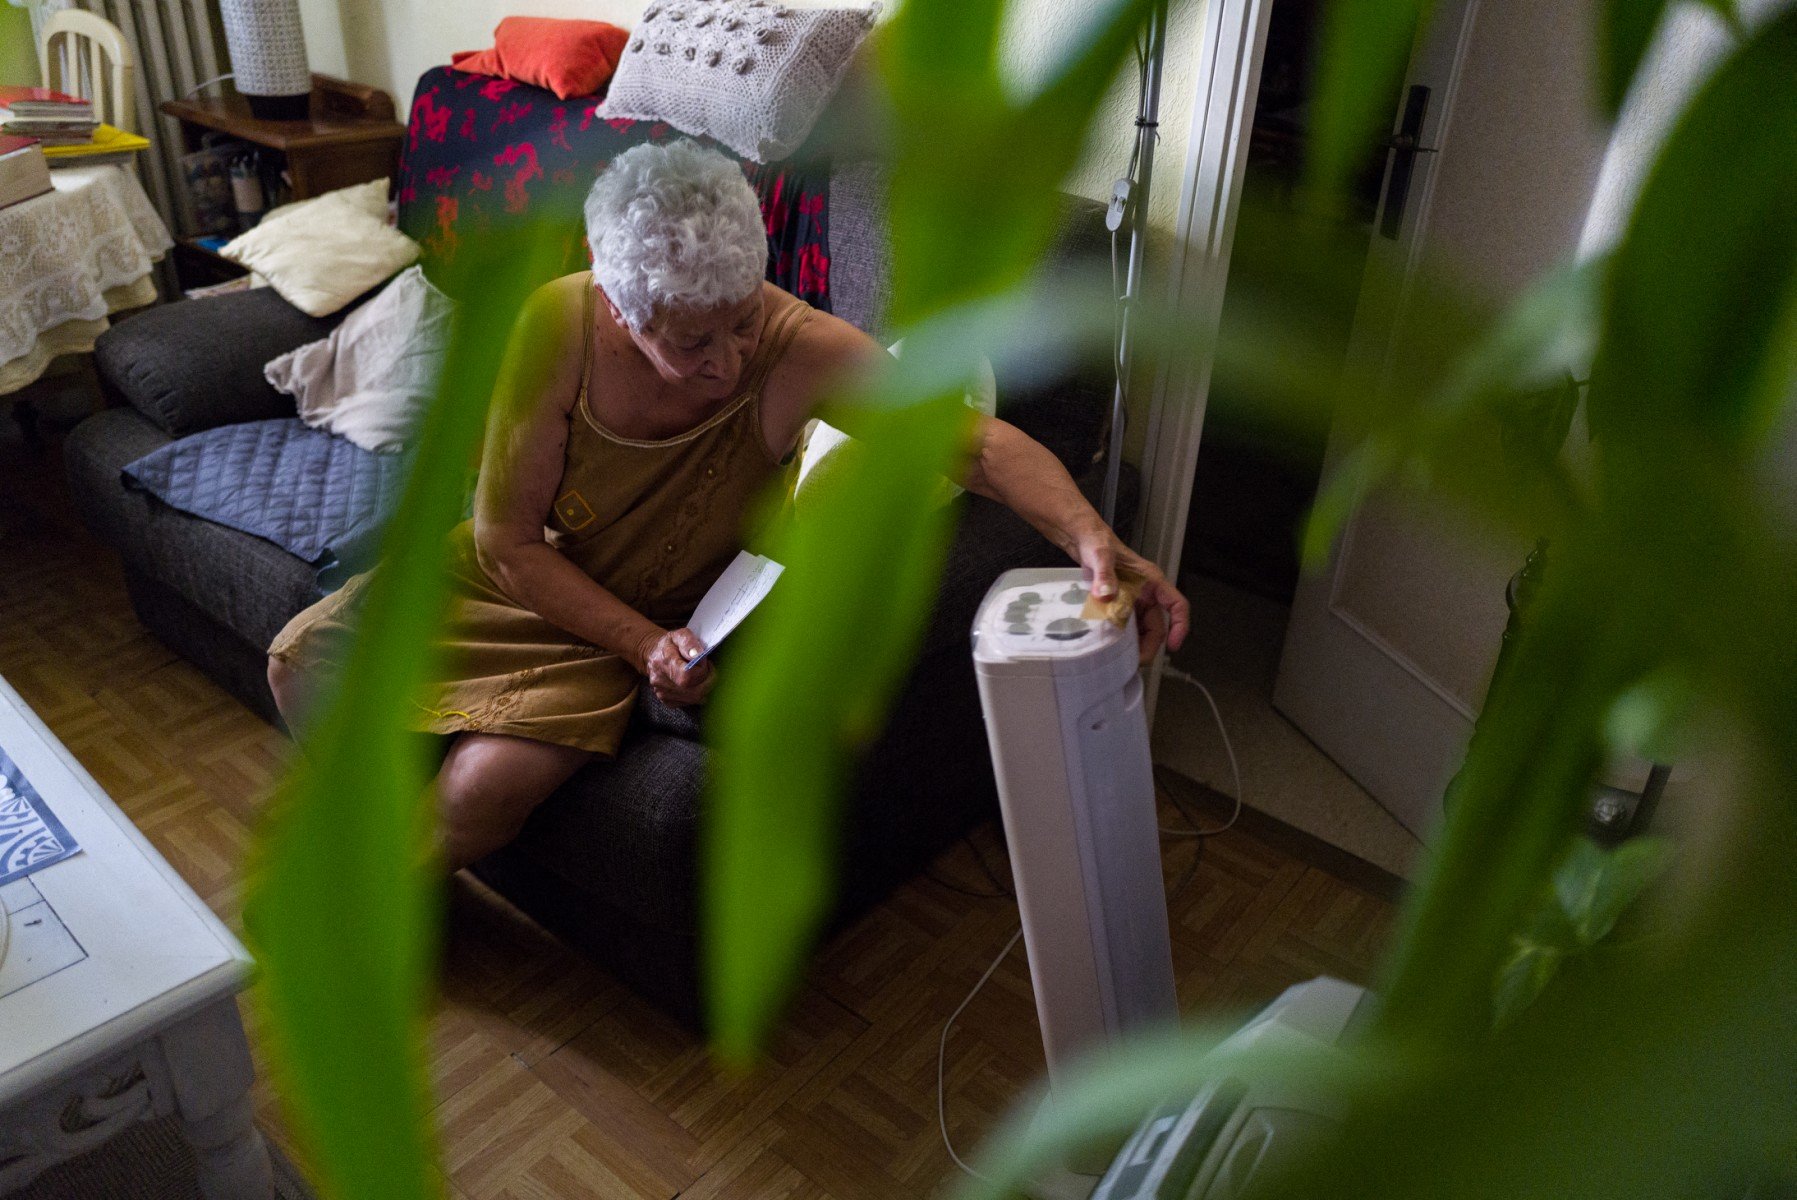 Too hot or too cold: Spain's homes struggle to keep comfortable temperatures thumbnail